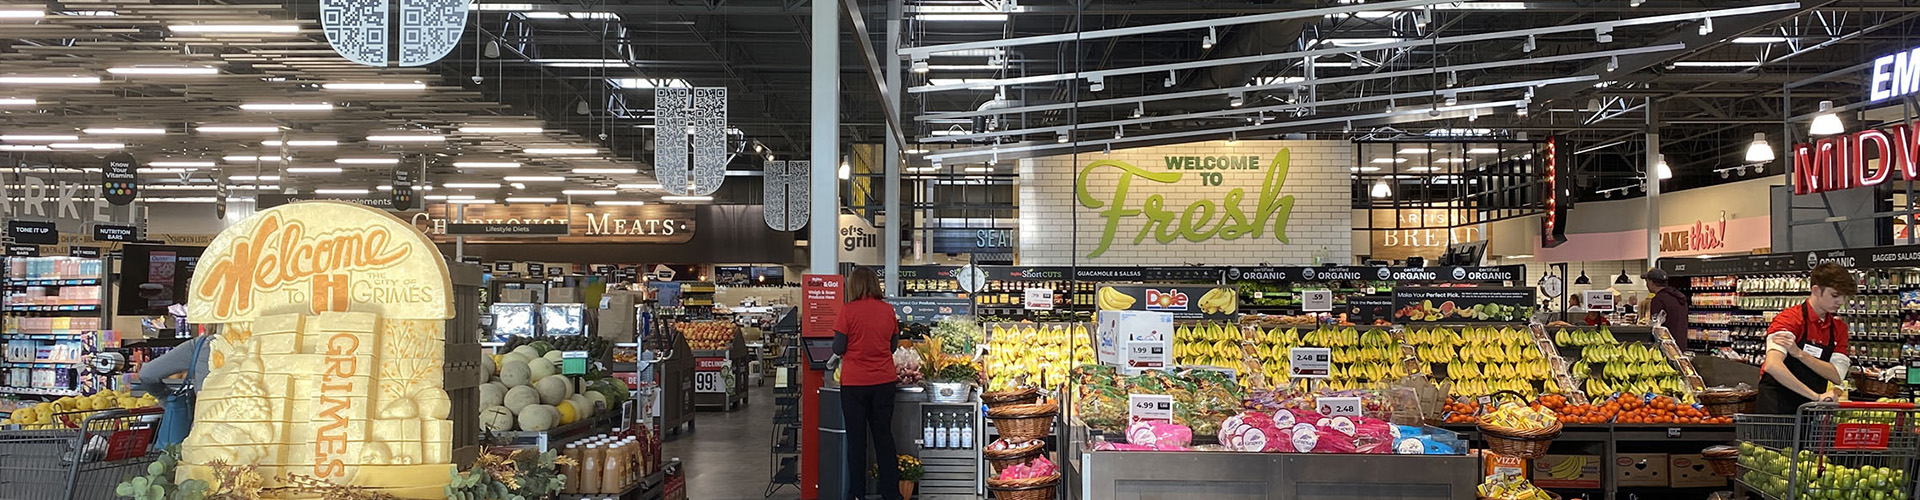 Trendy modern grocery store with QR codes banner